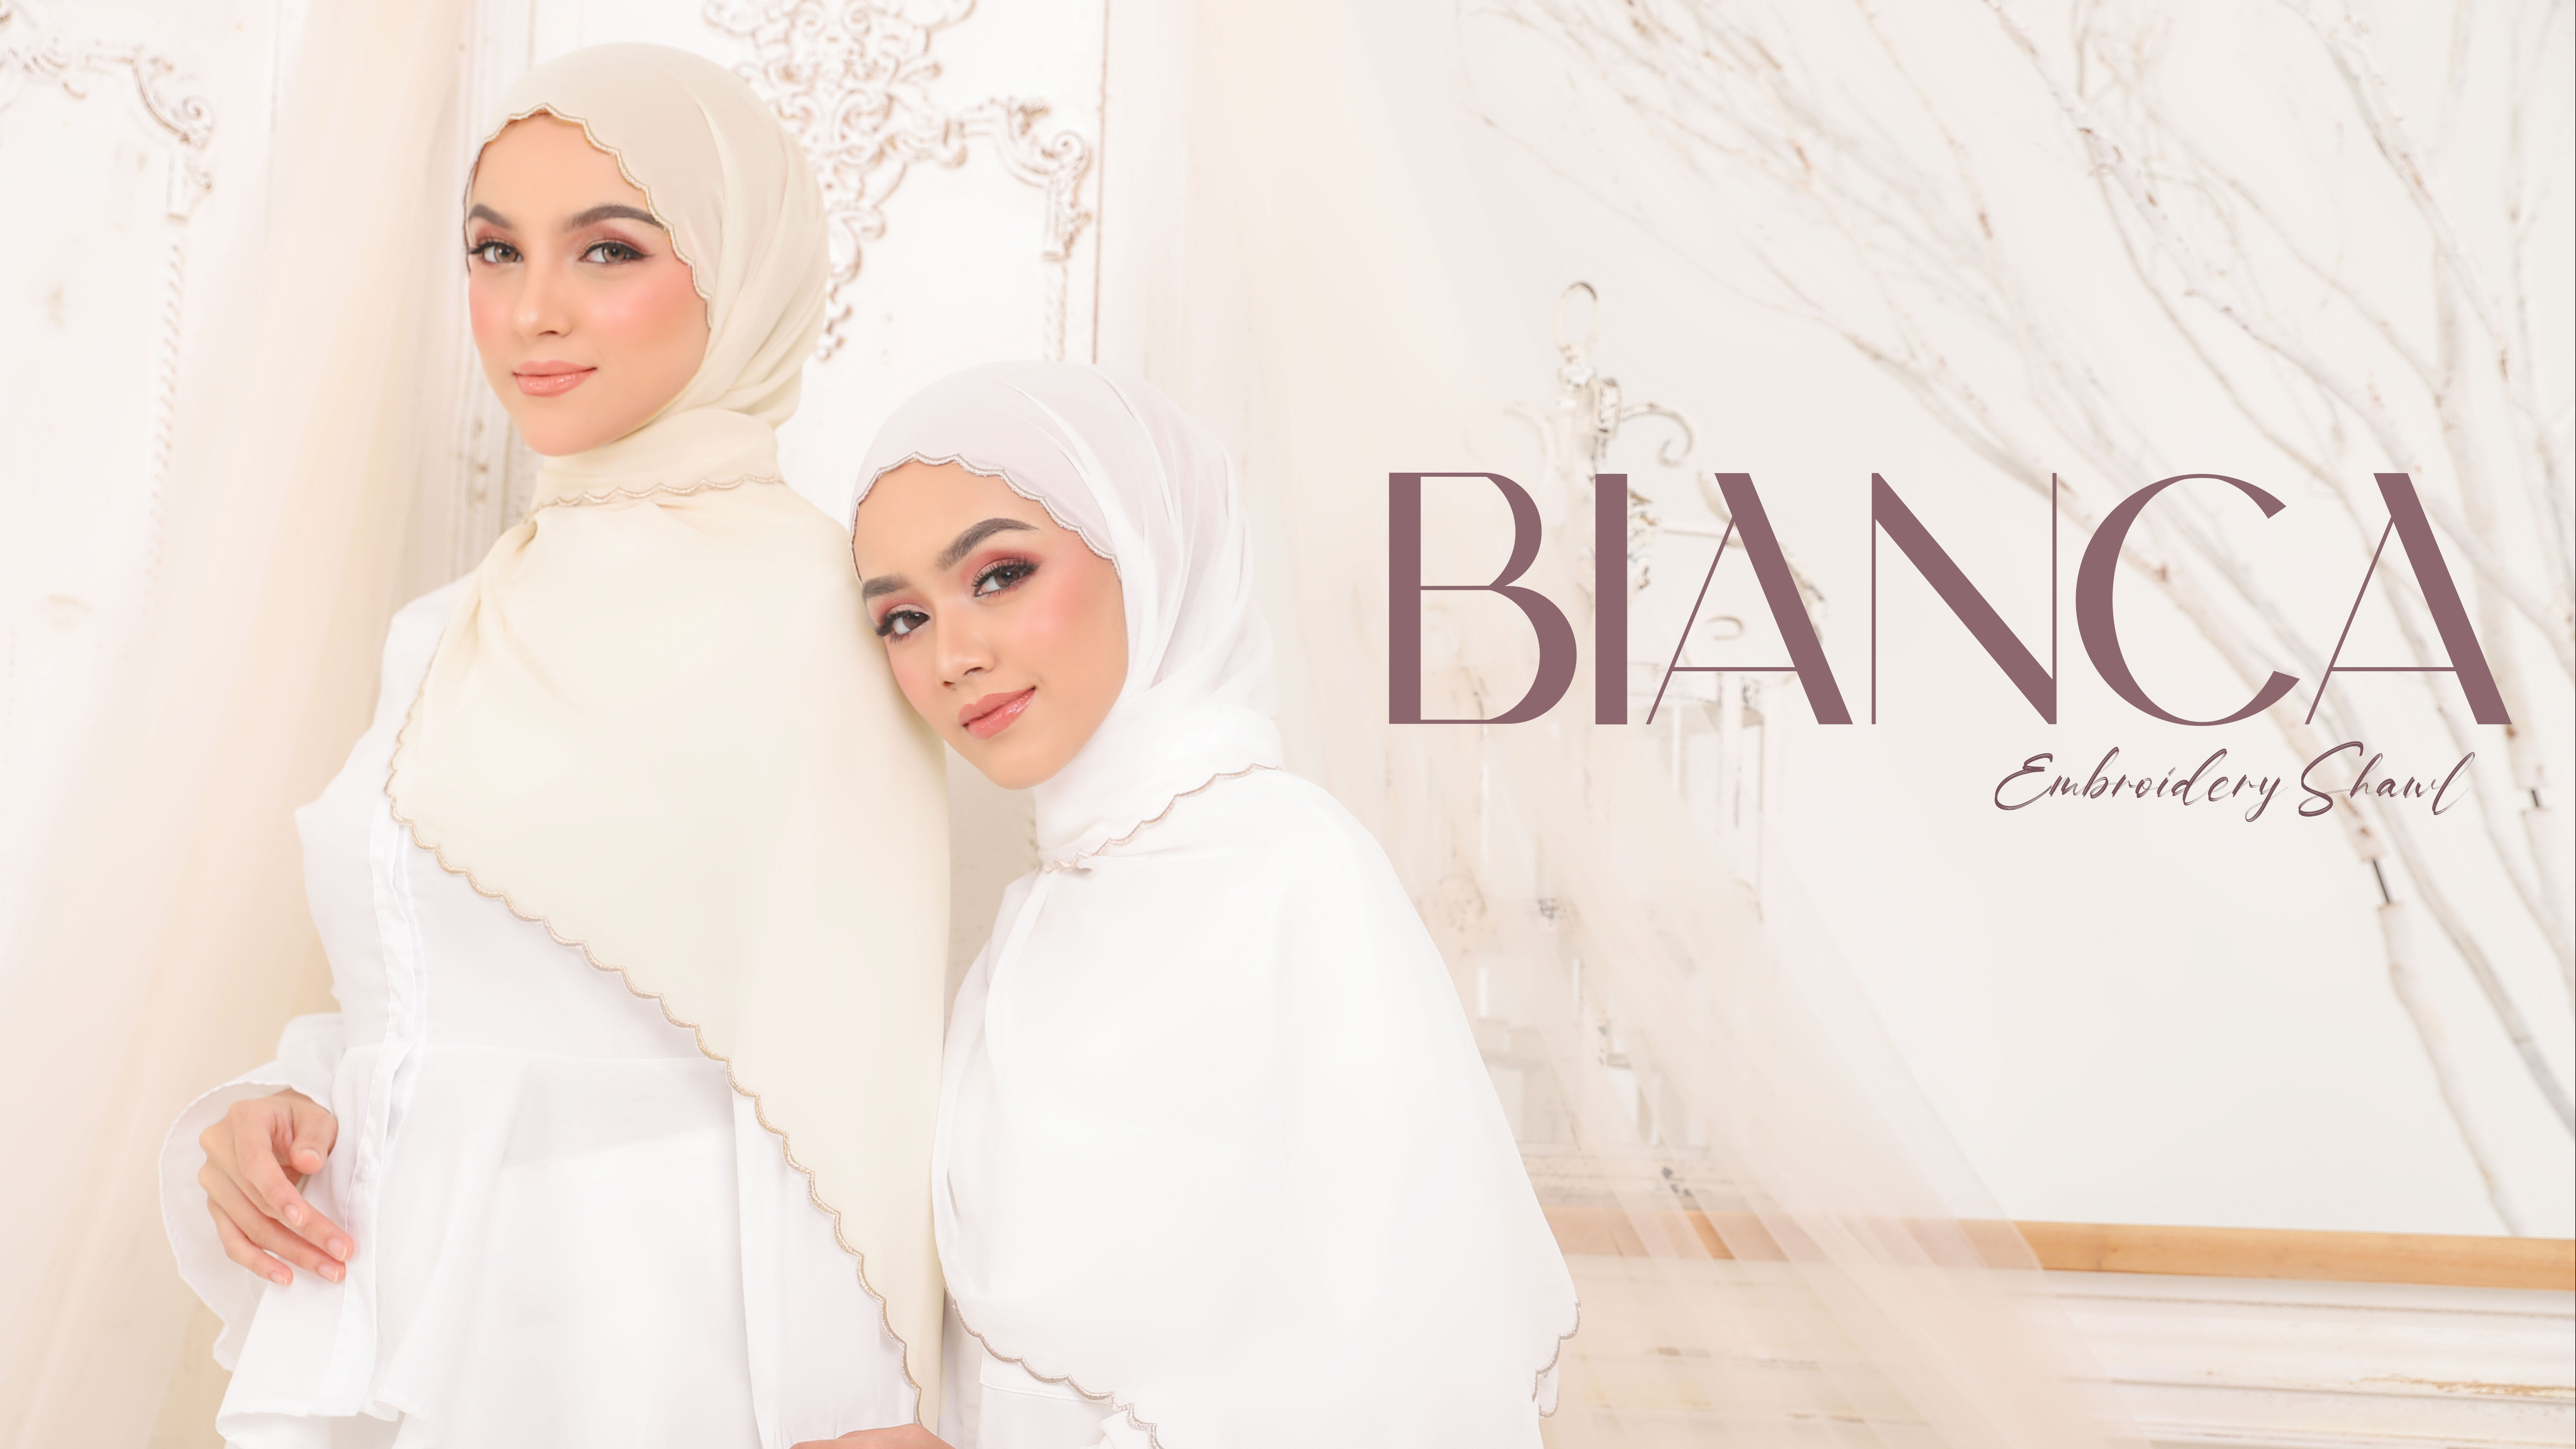 BIANCA EMBROIDERRY SHAWL